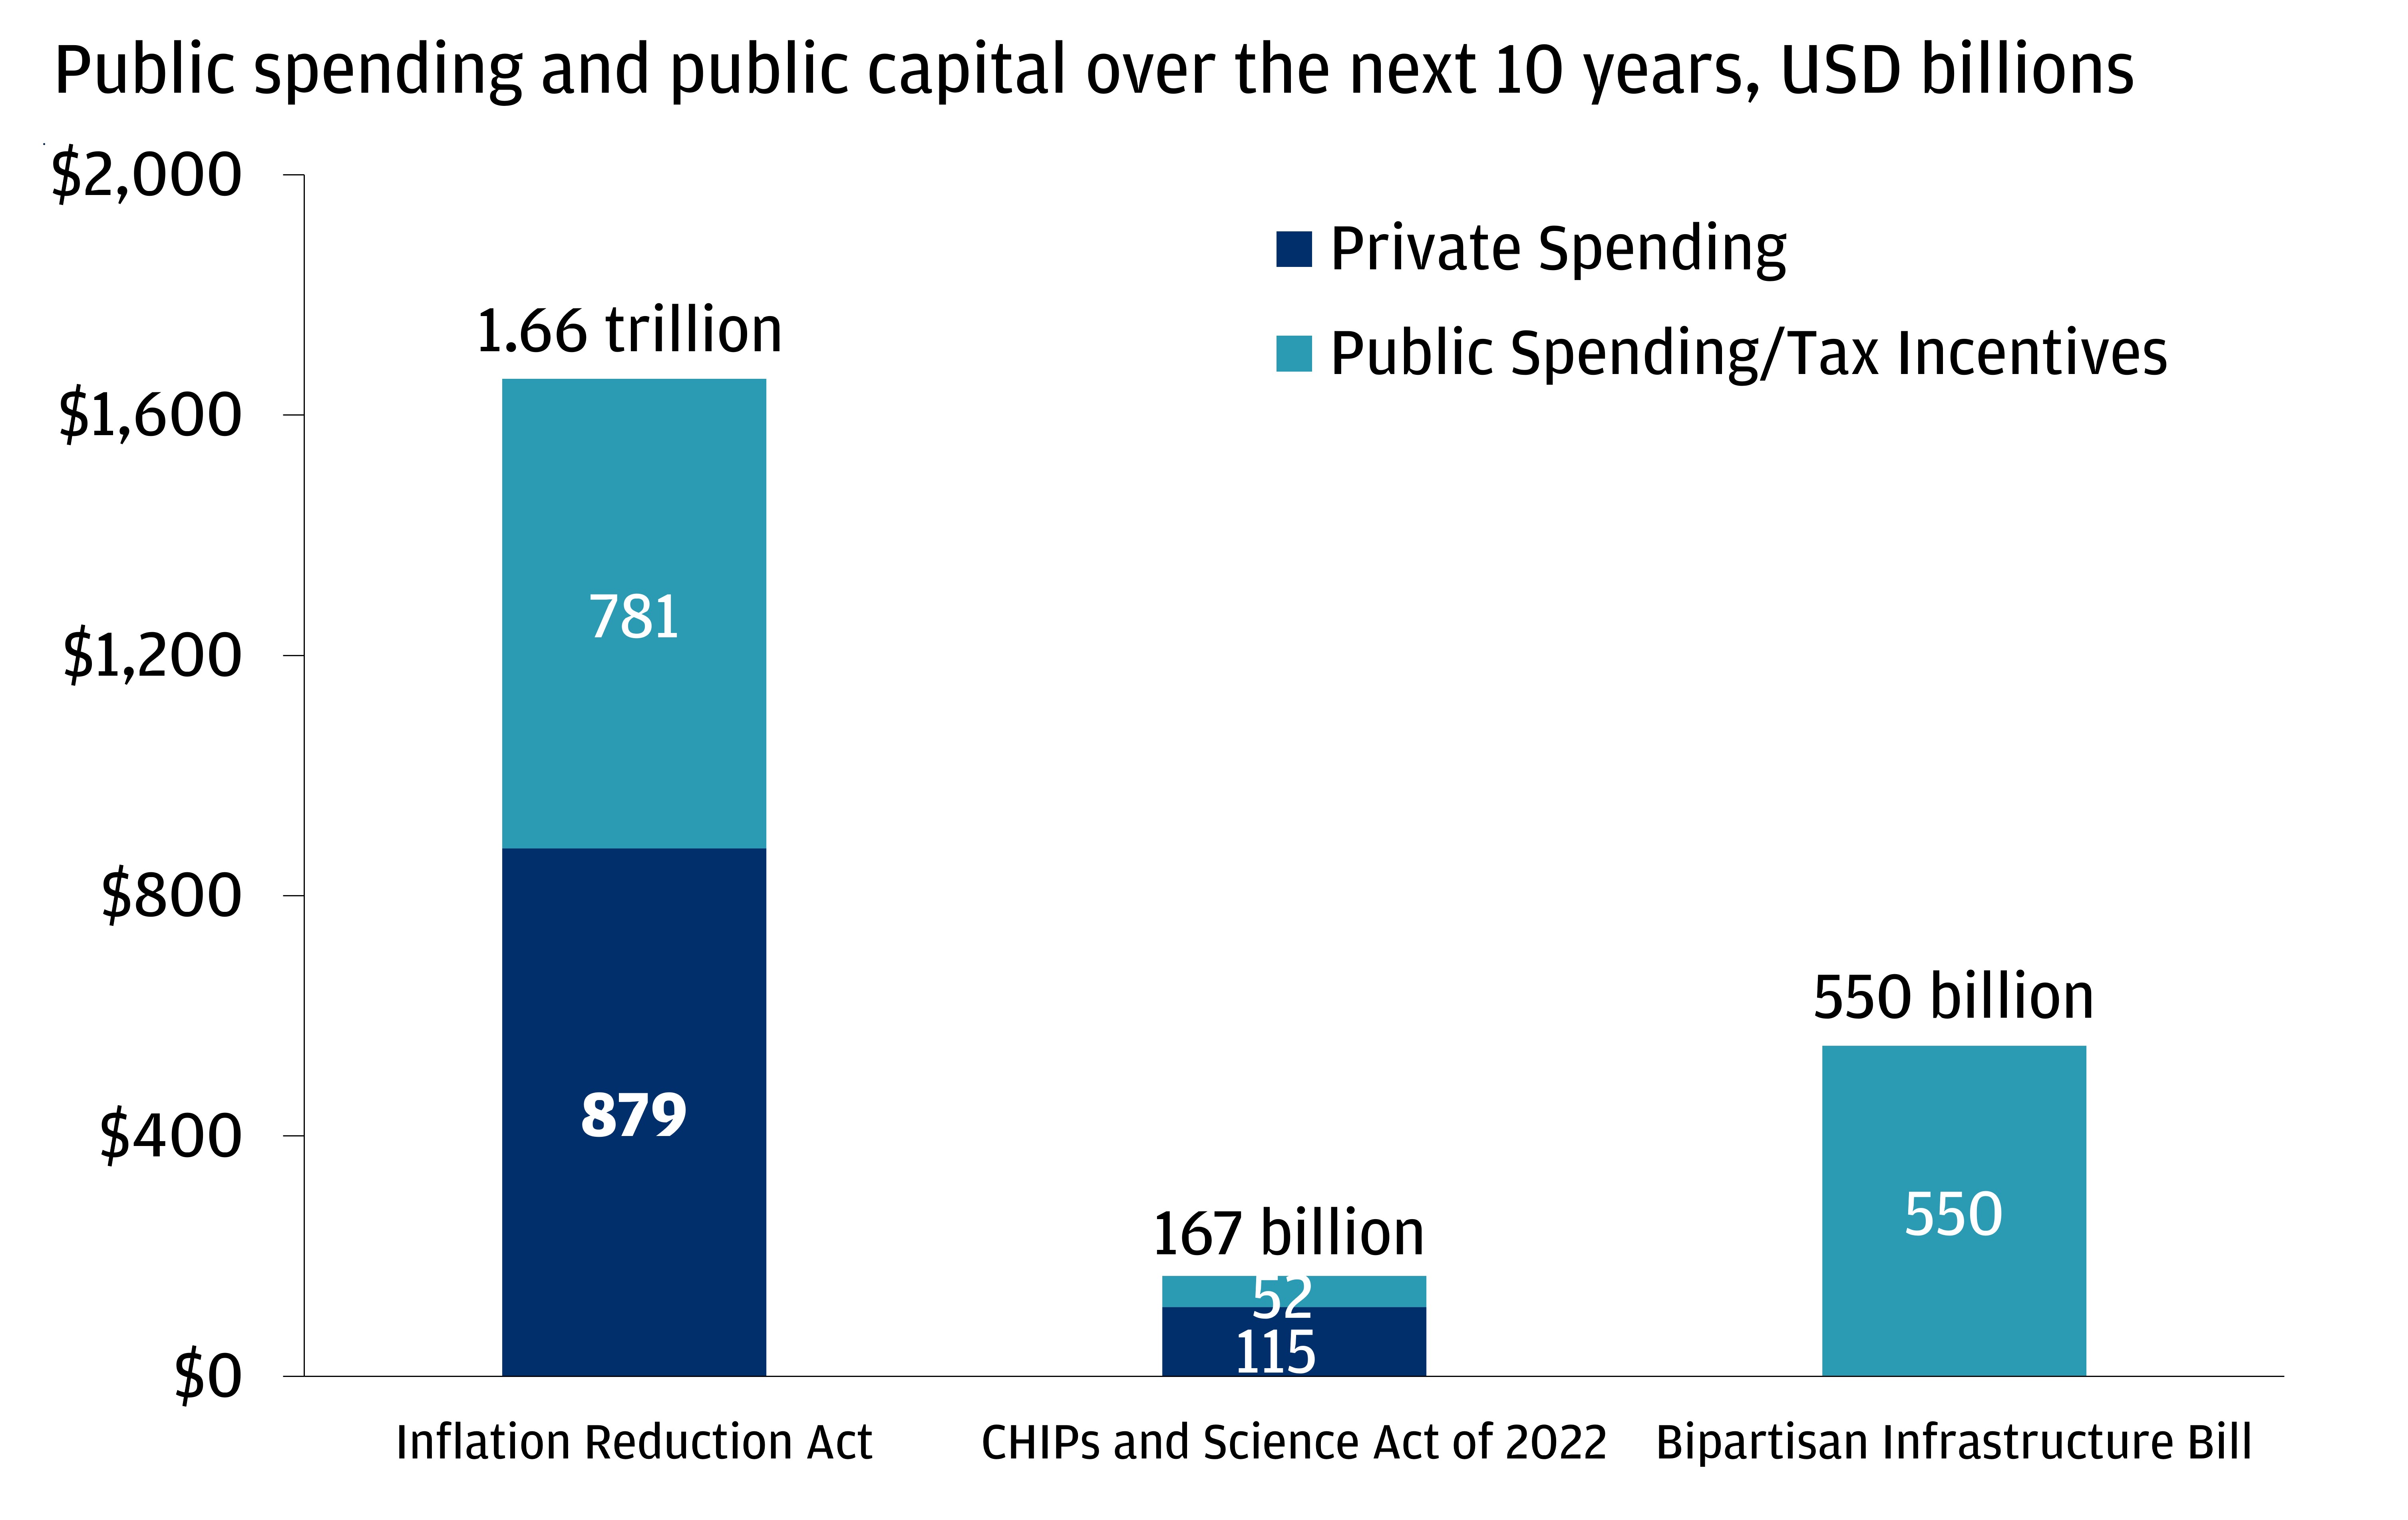 This chart shows the public spending and public capital over the next 10 years in USD billions.